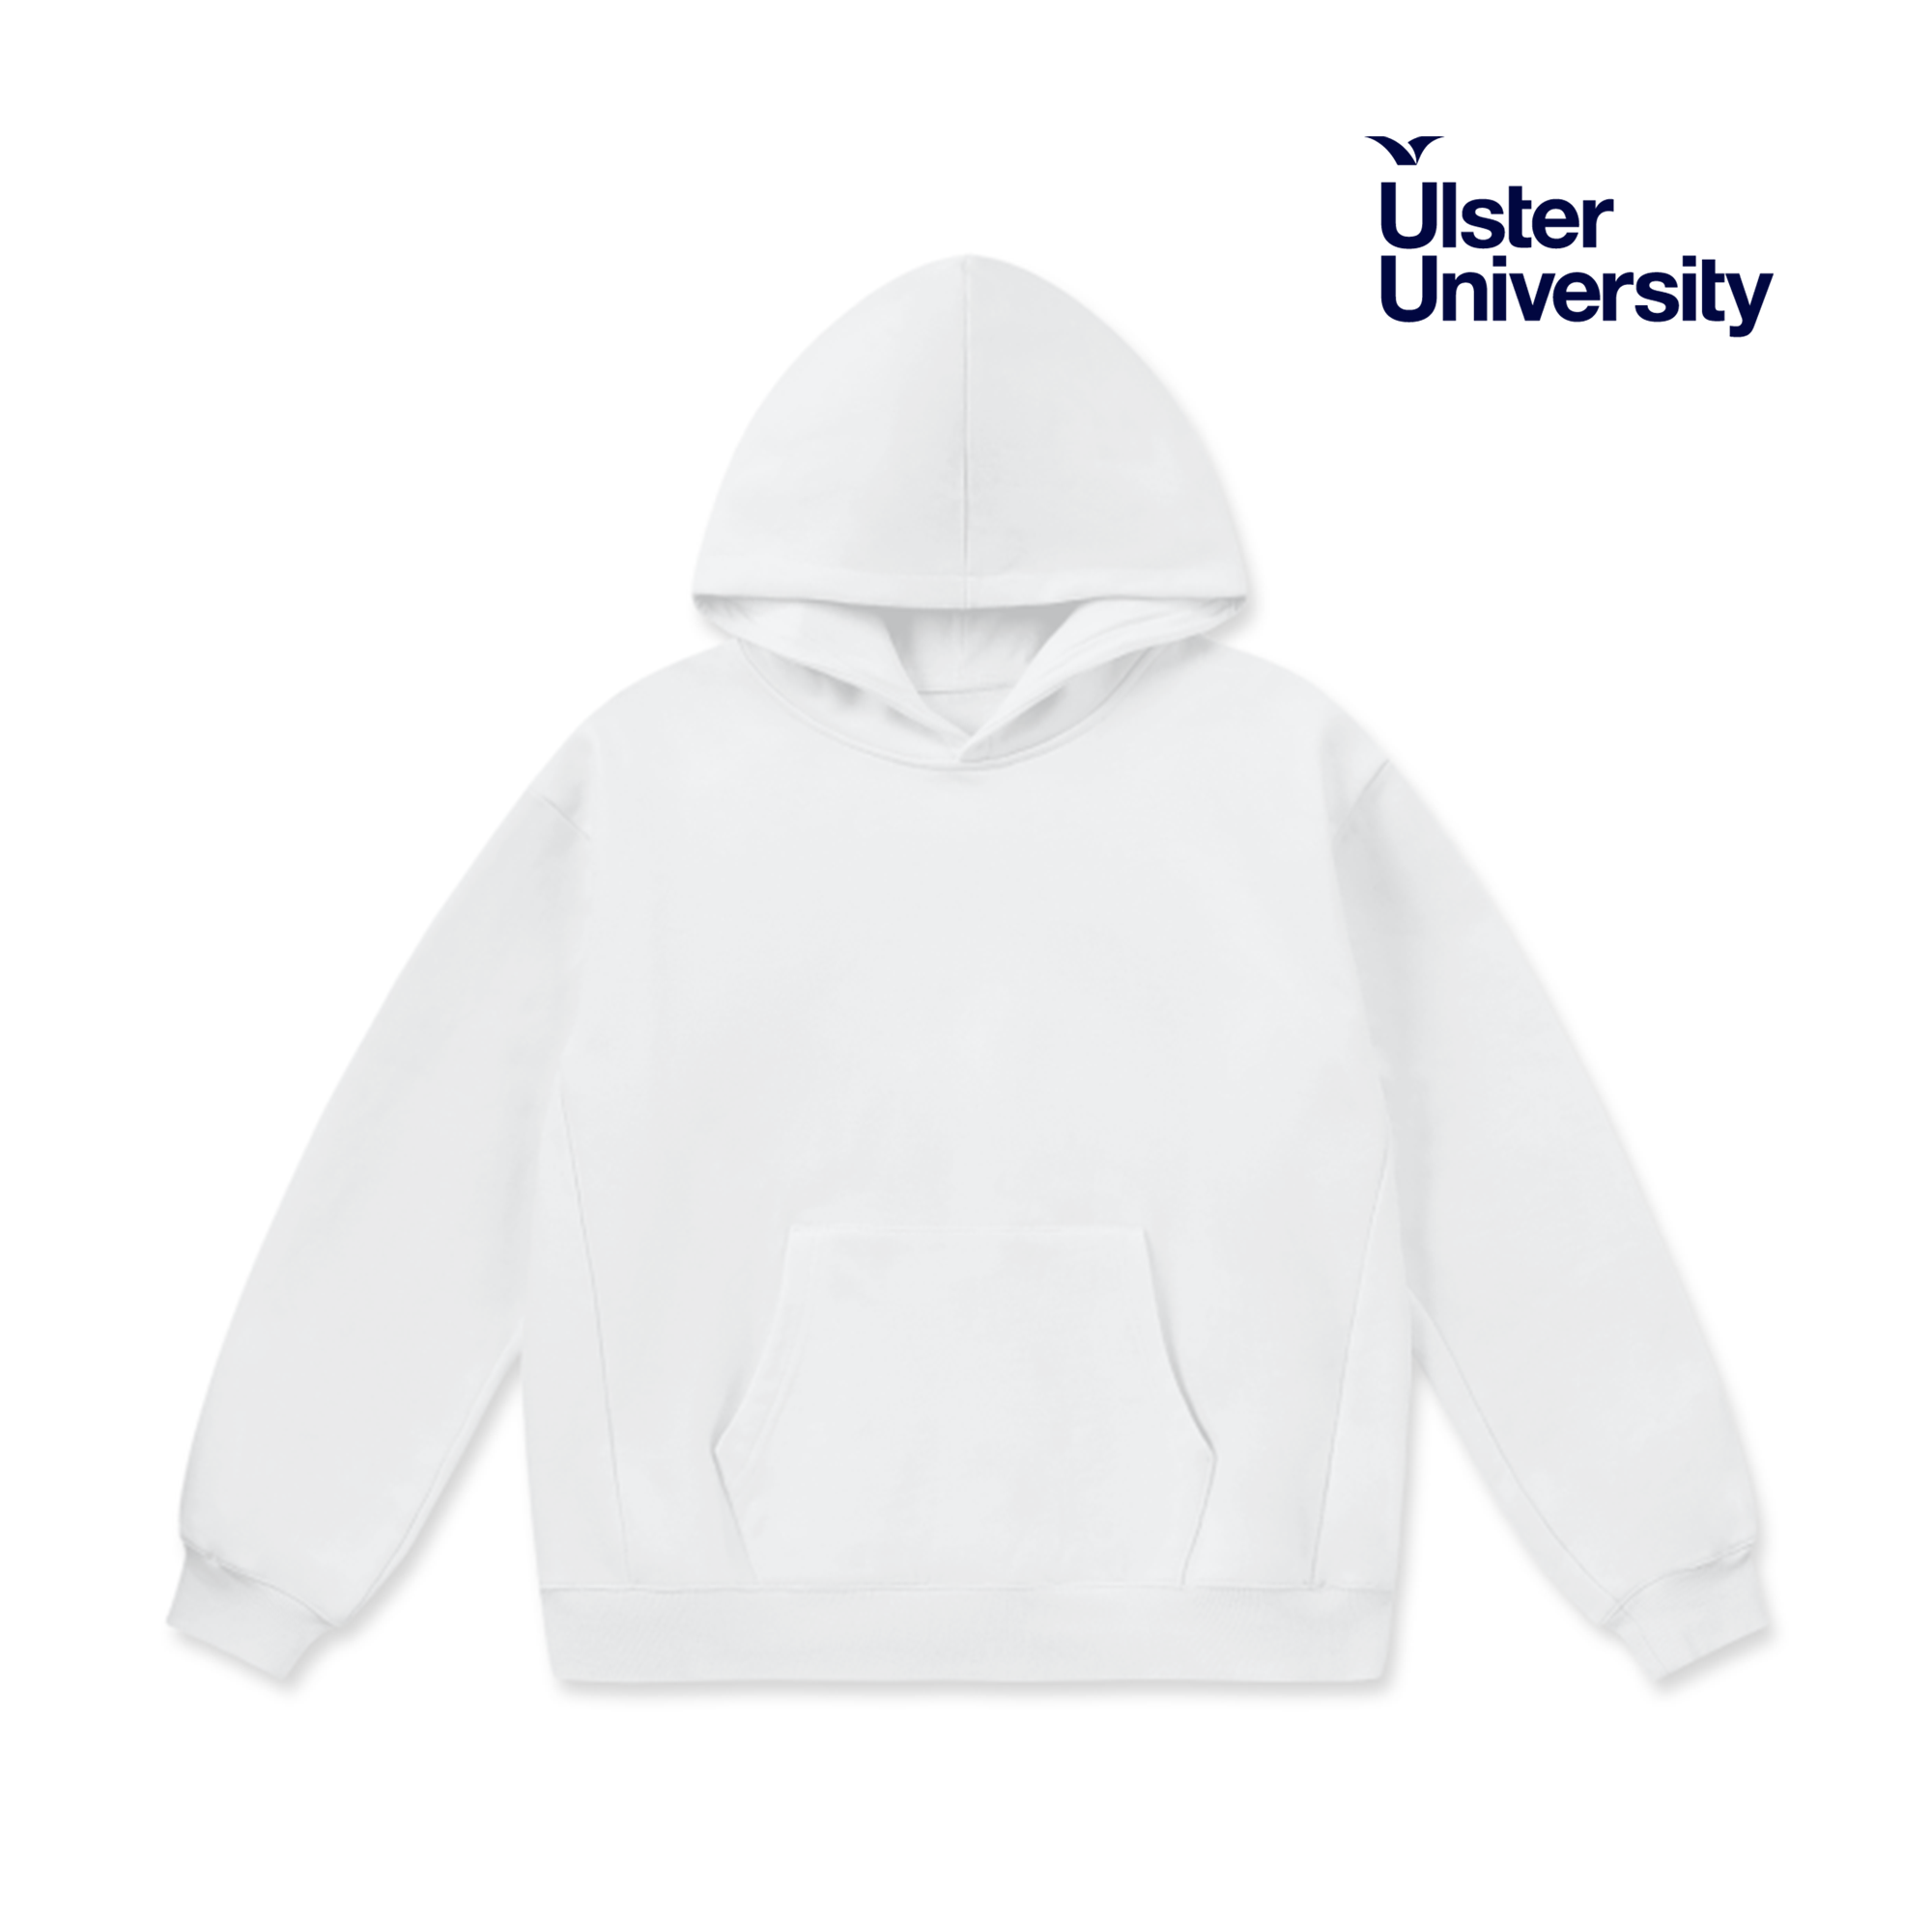 LCC Super Weighted Hoodie - Ulster University (Modern)